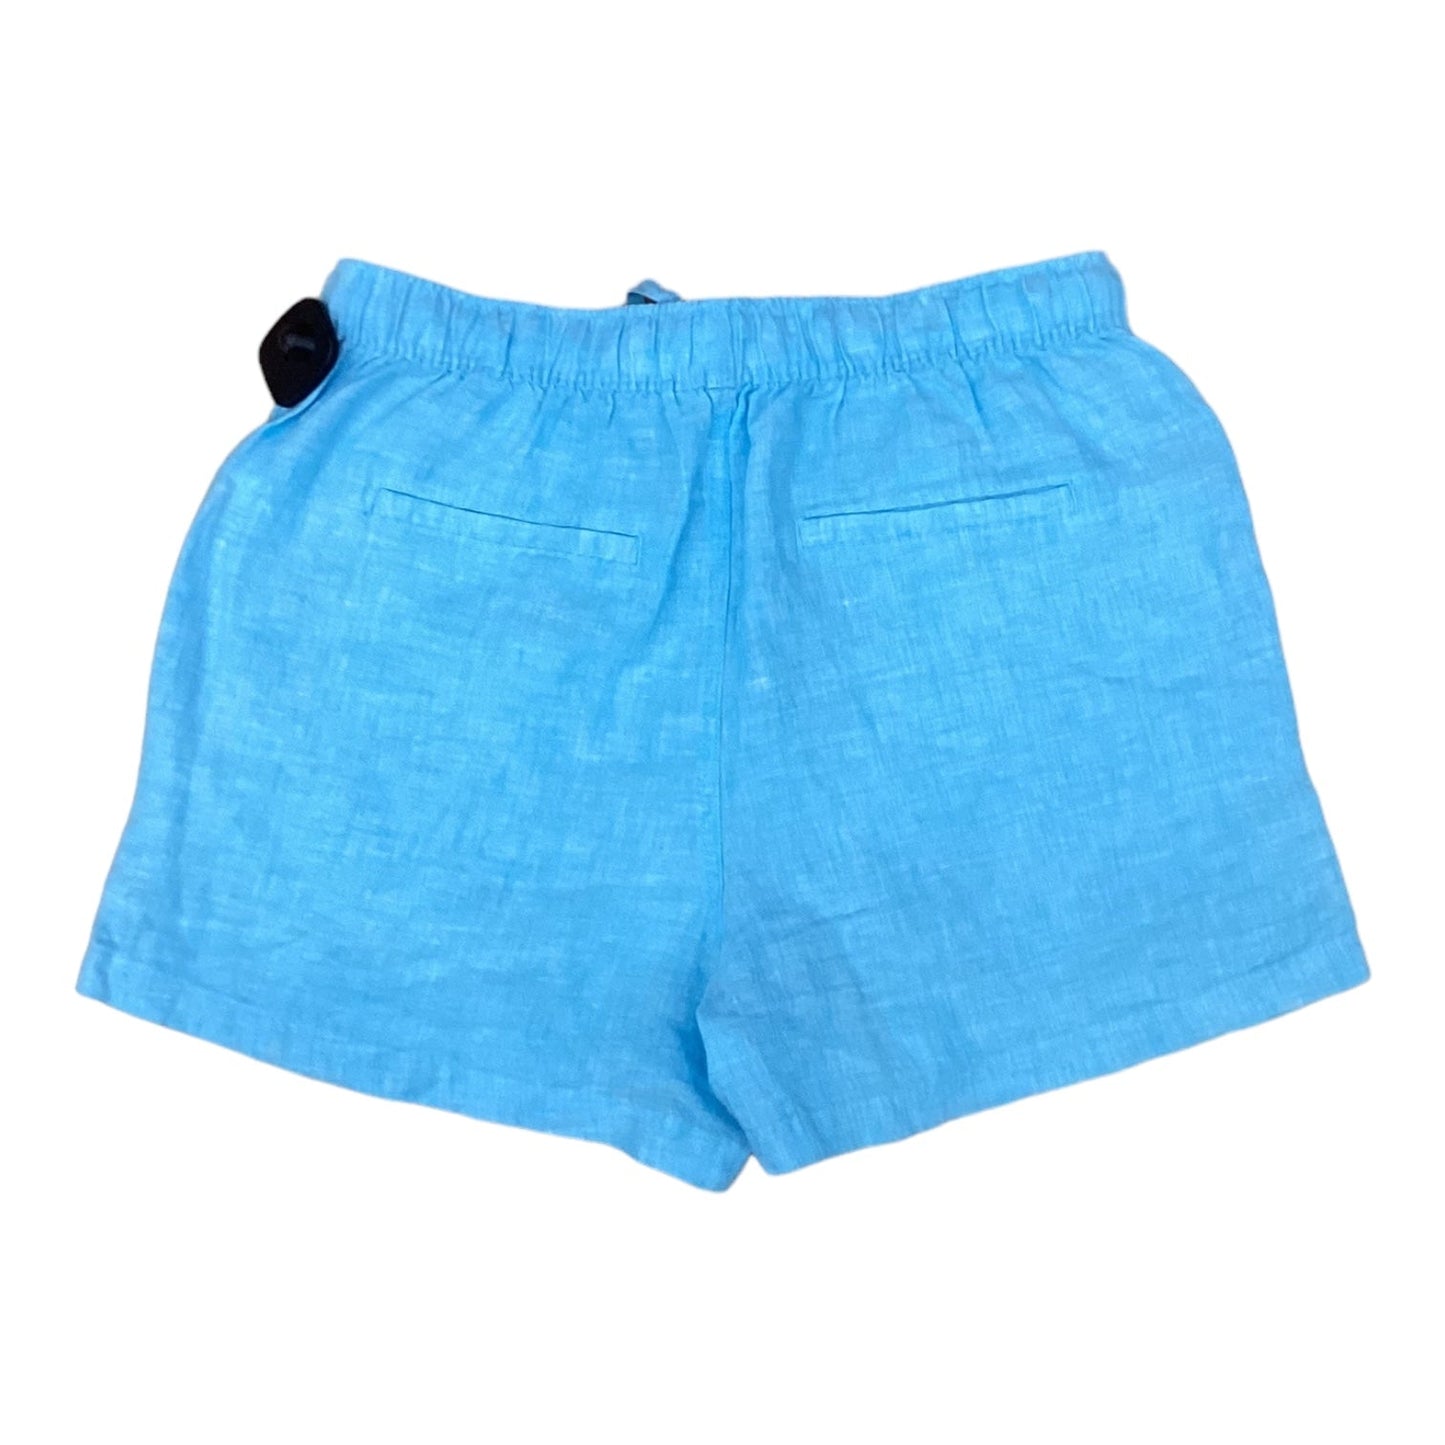 Blue Shorts C And C, Size M